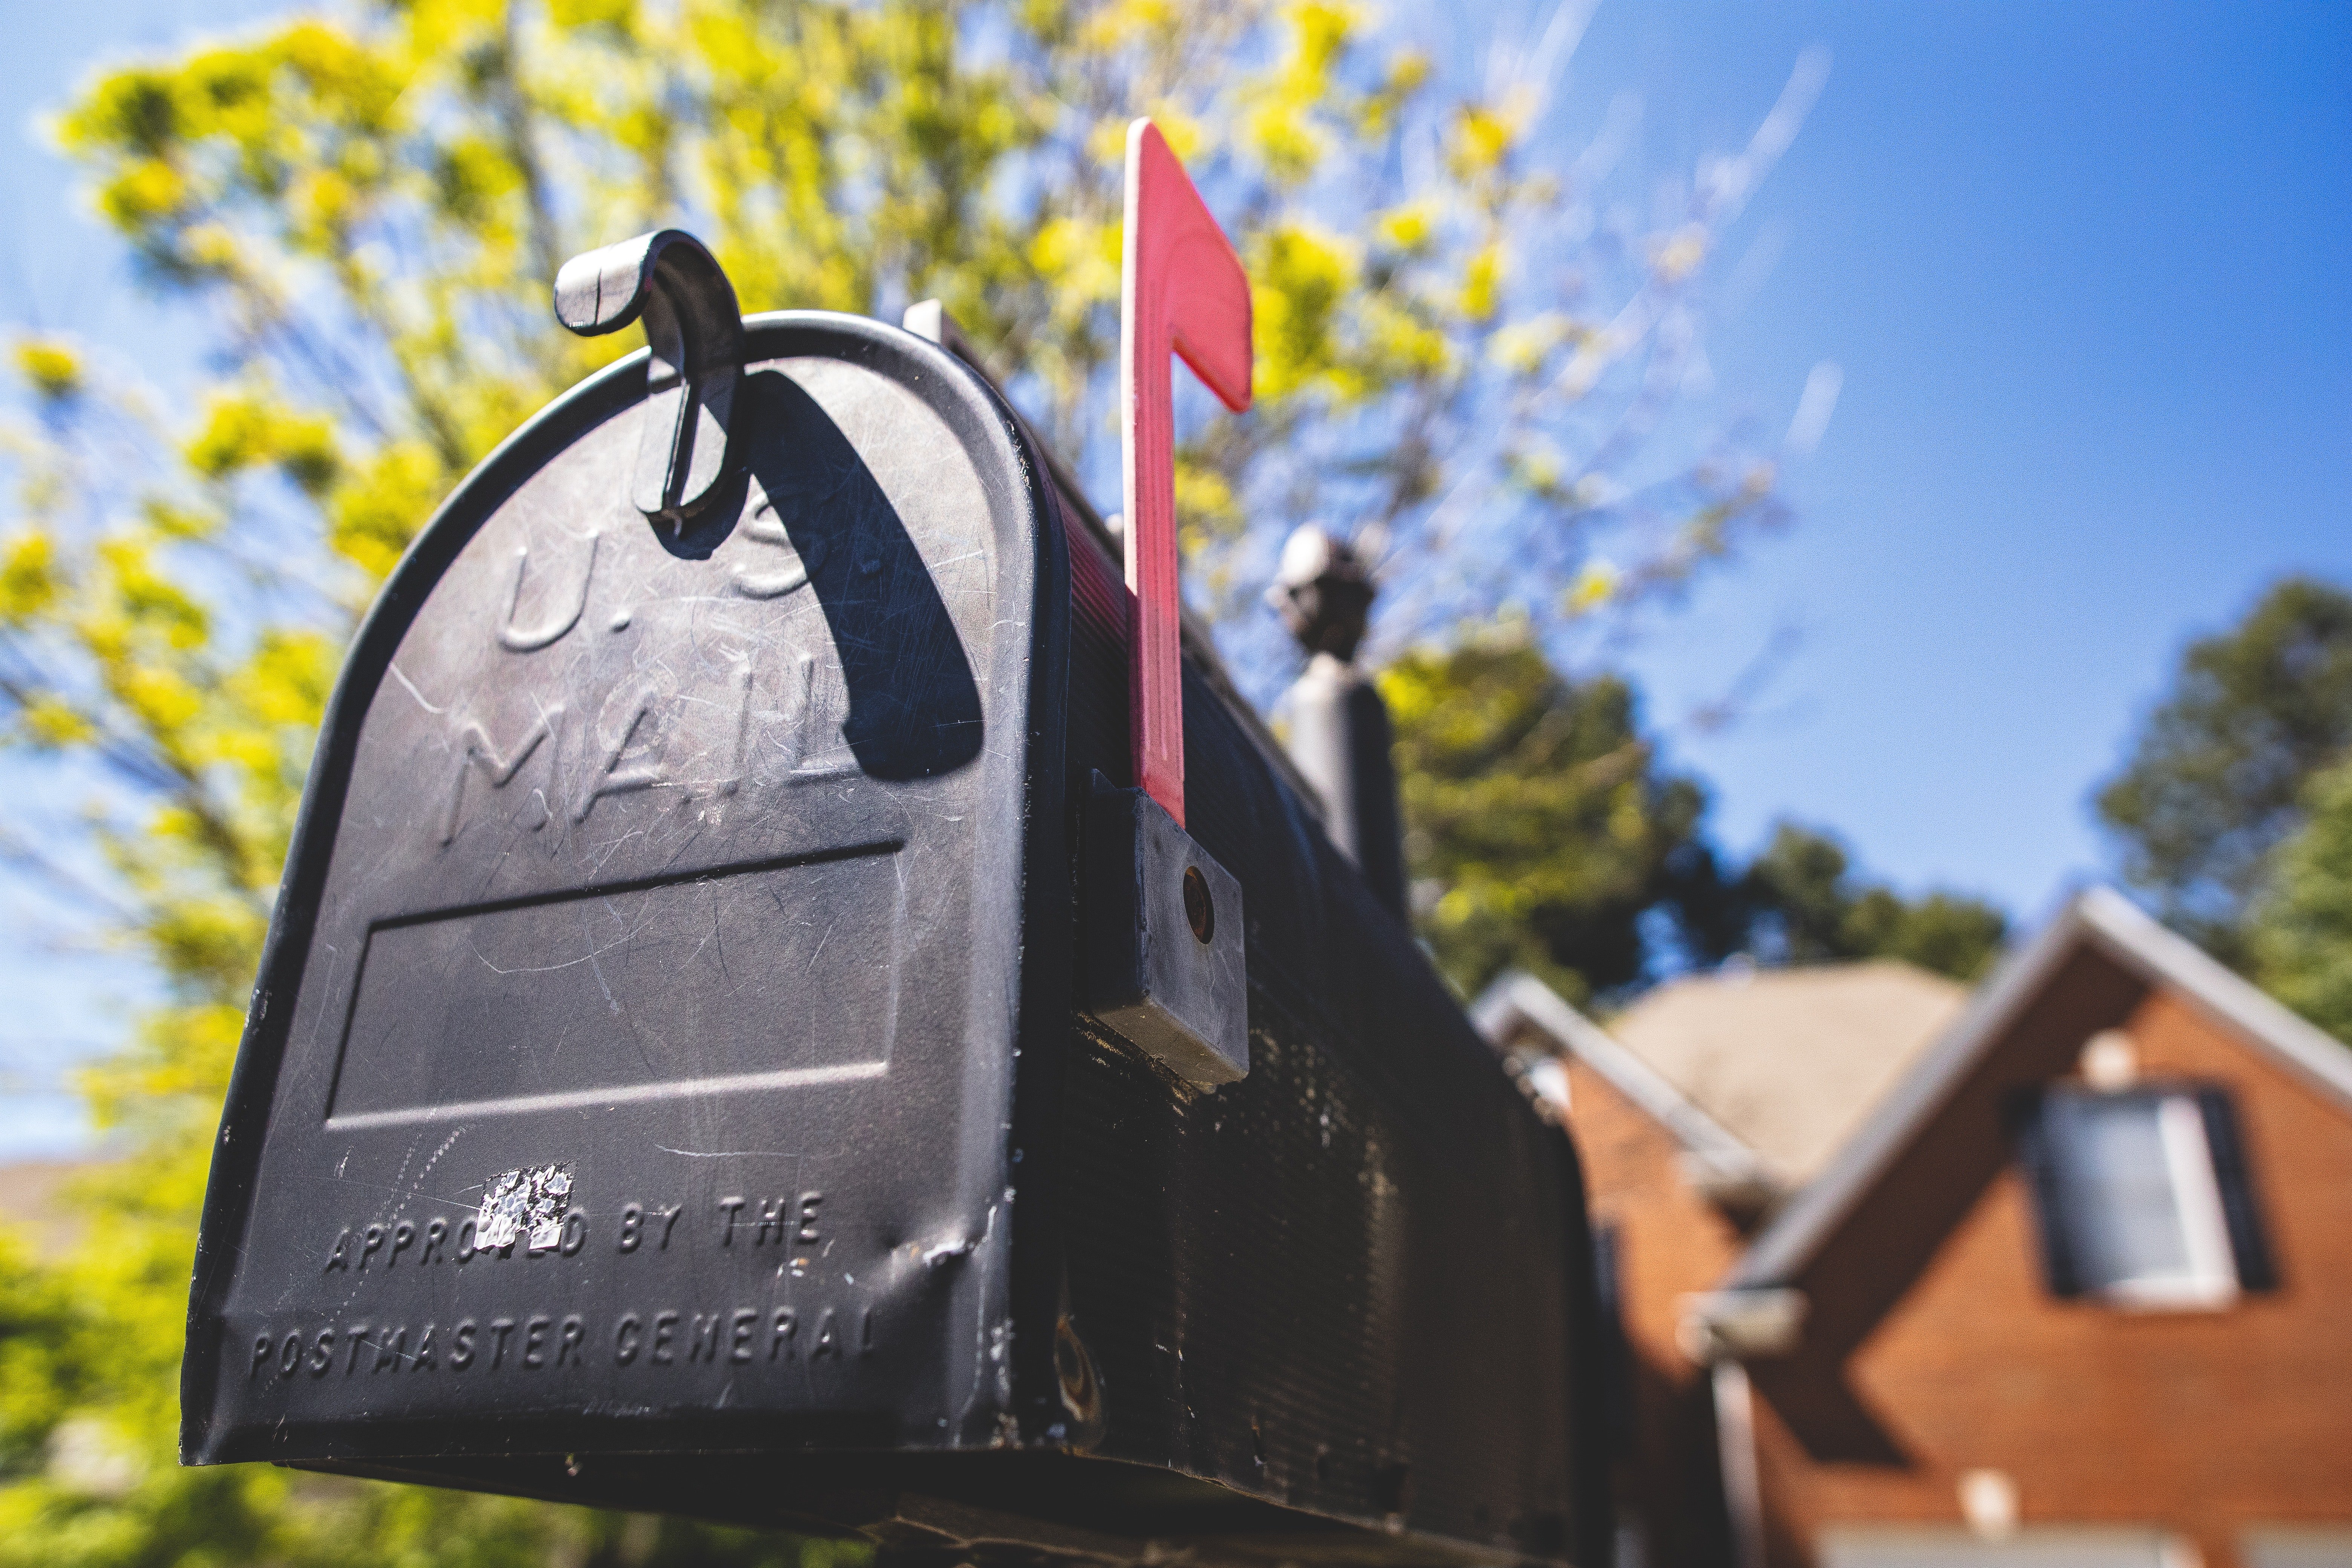 Isabella left the food inside a mailbox. | Source: Pexels